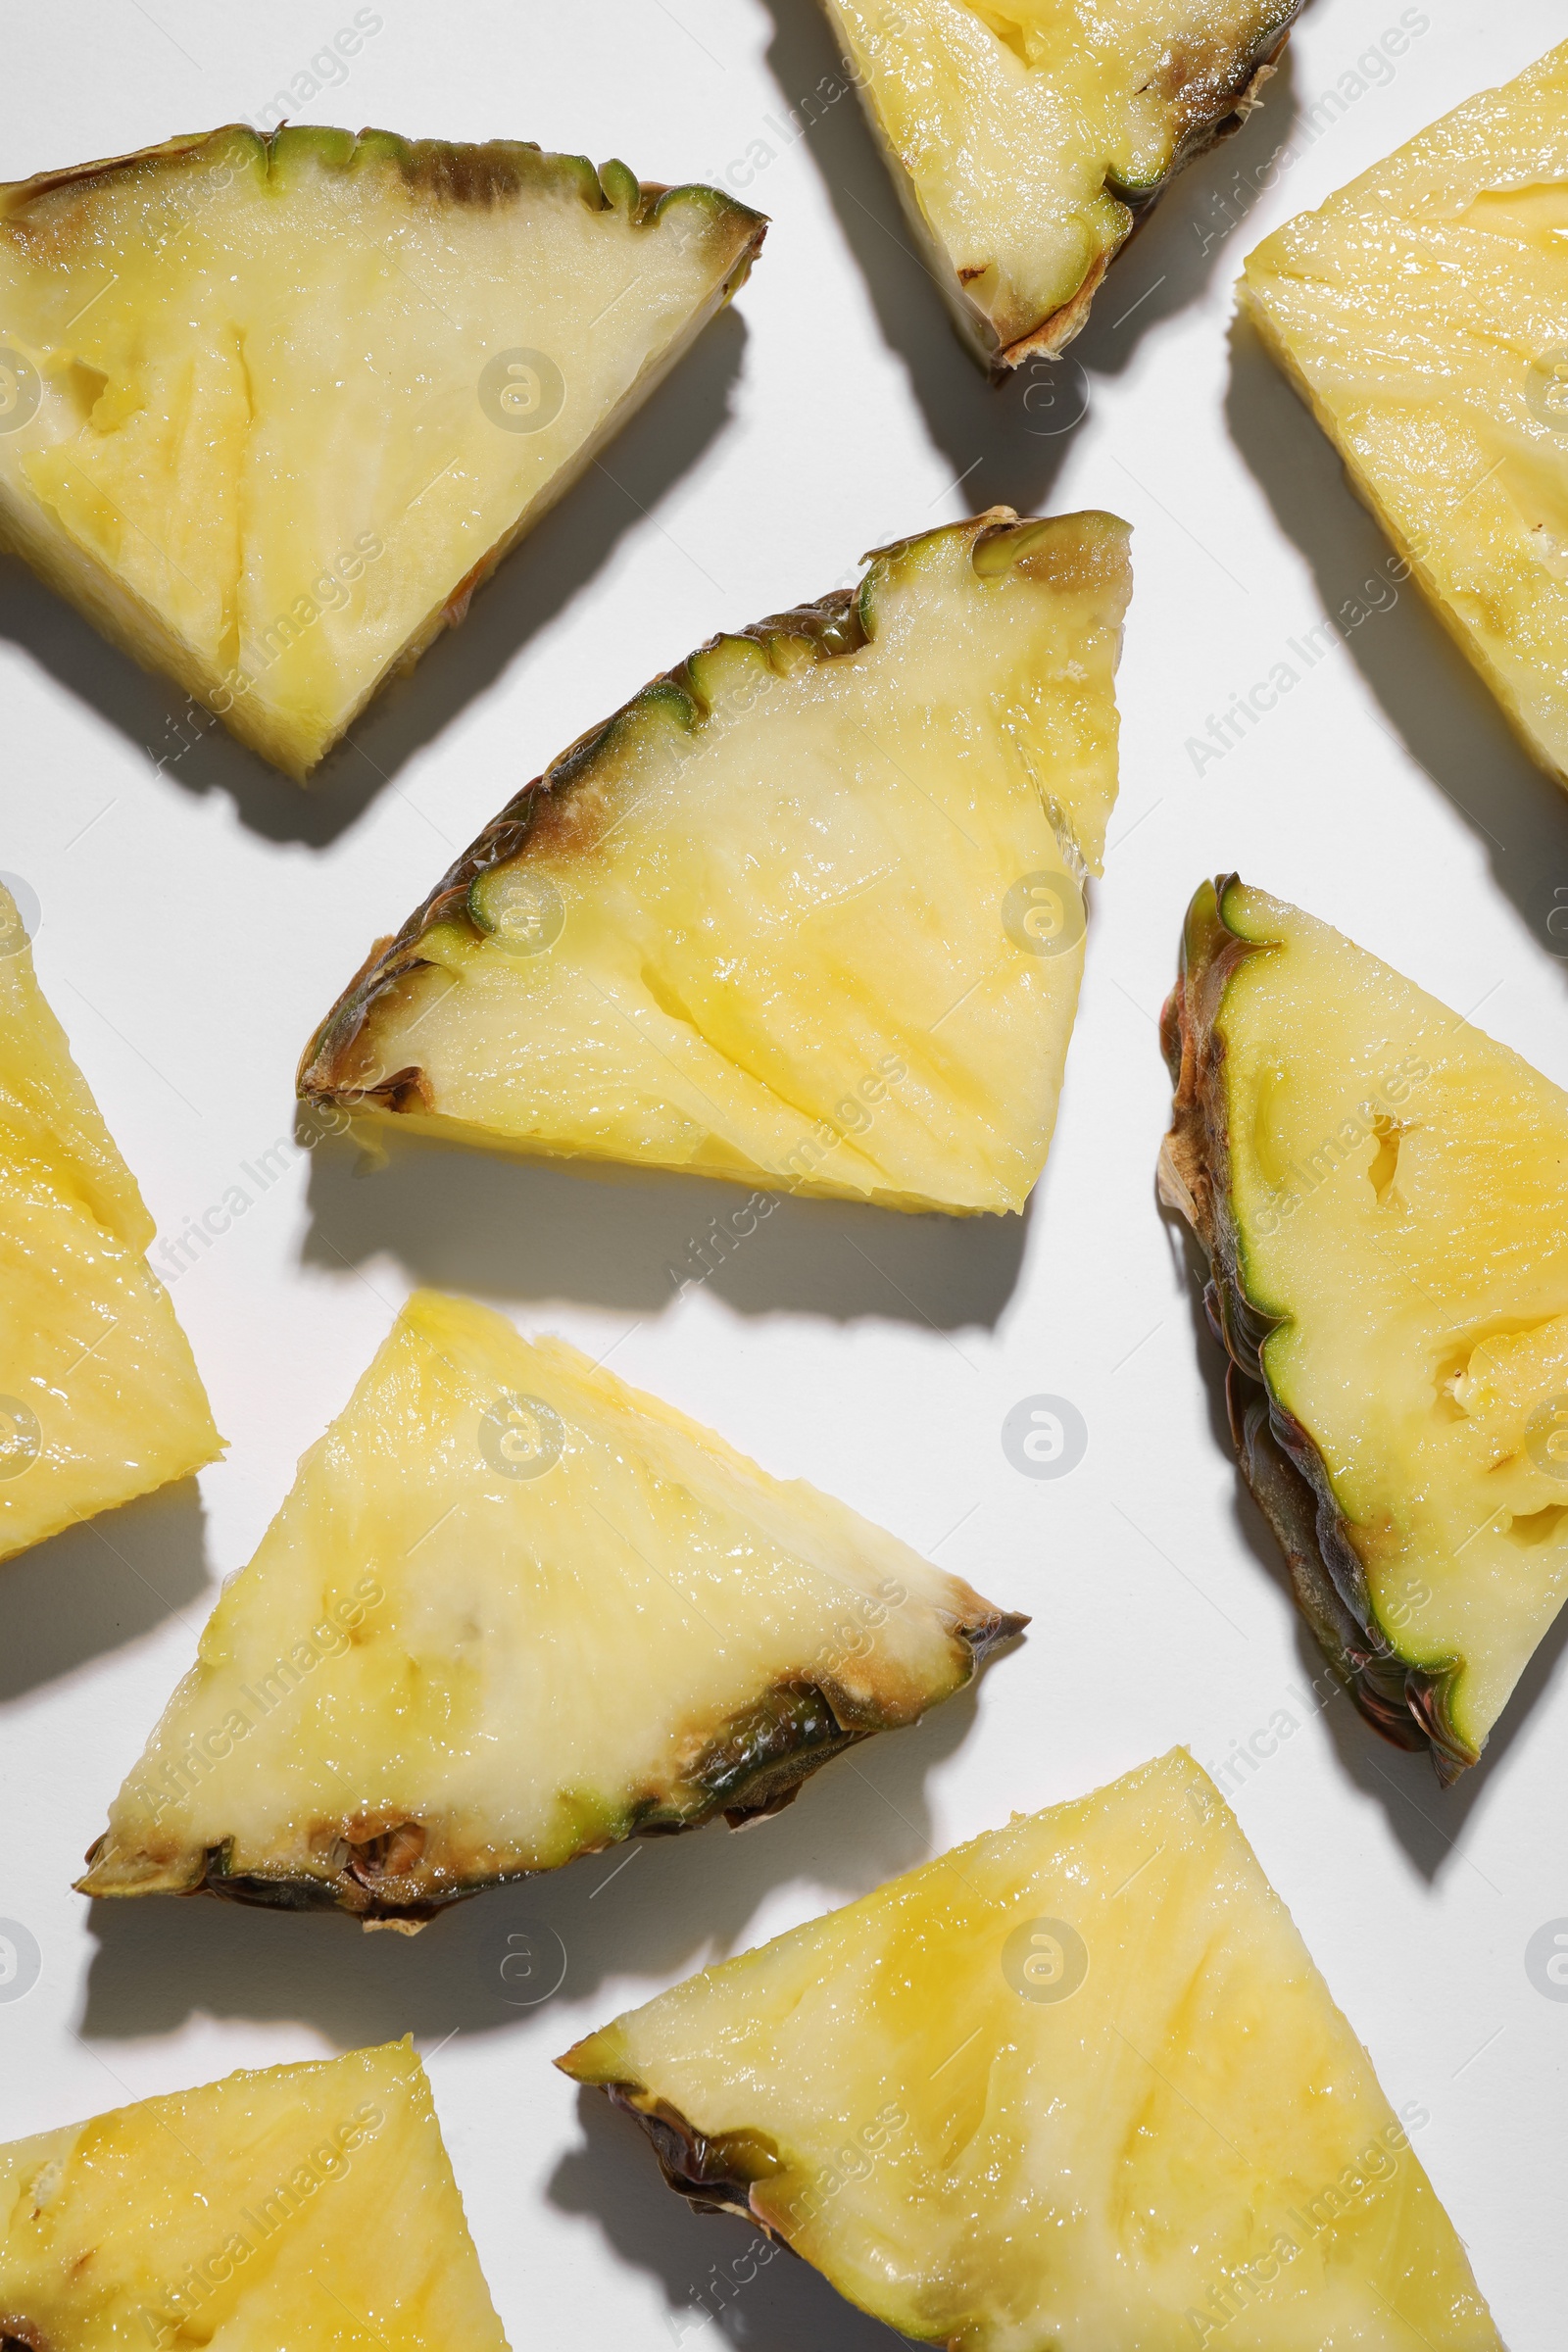 Photo of Pieces of tasty ripe pineapple on white background, flat lay